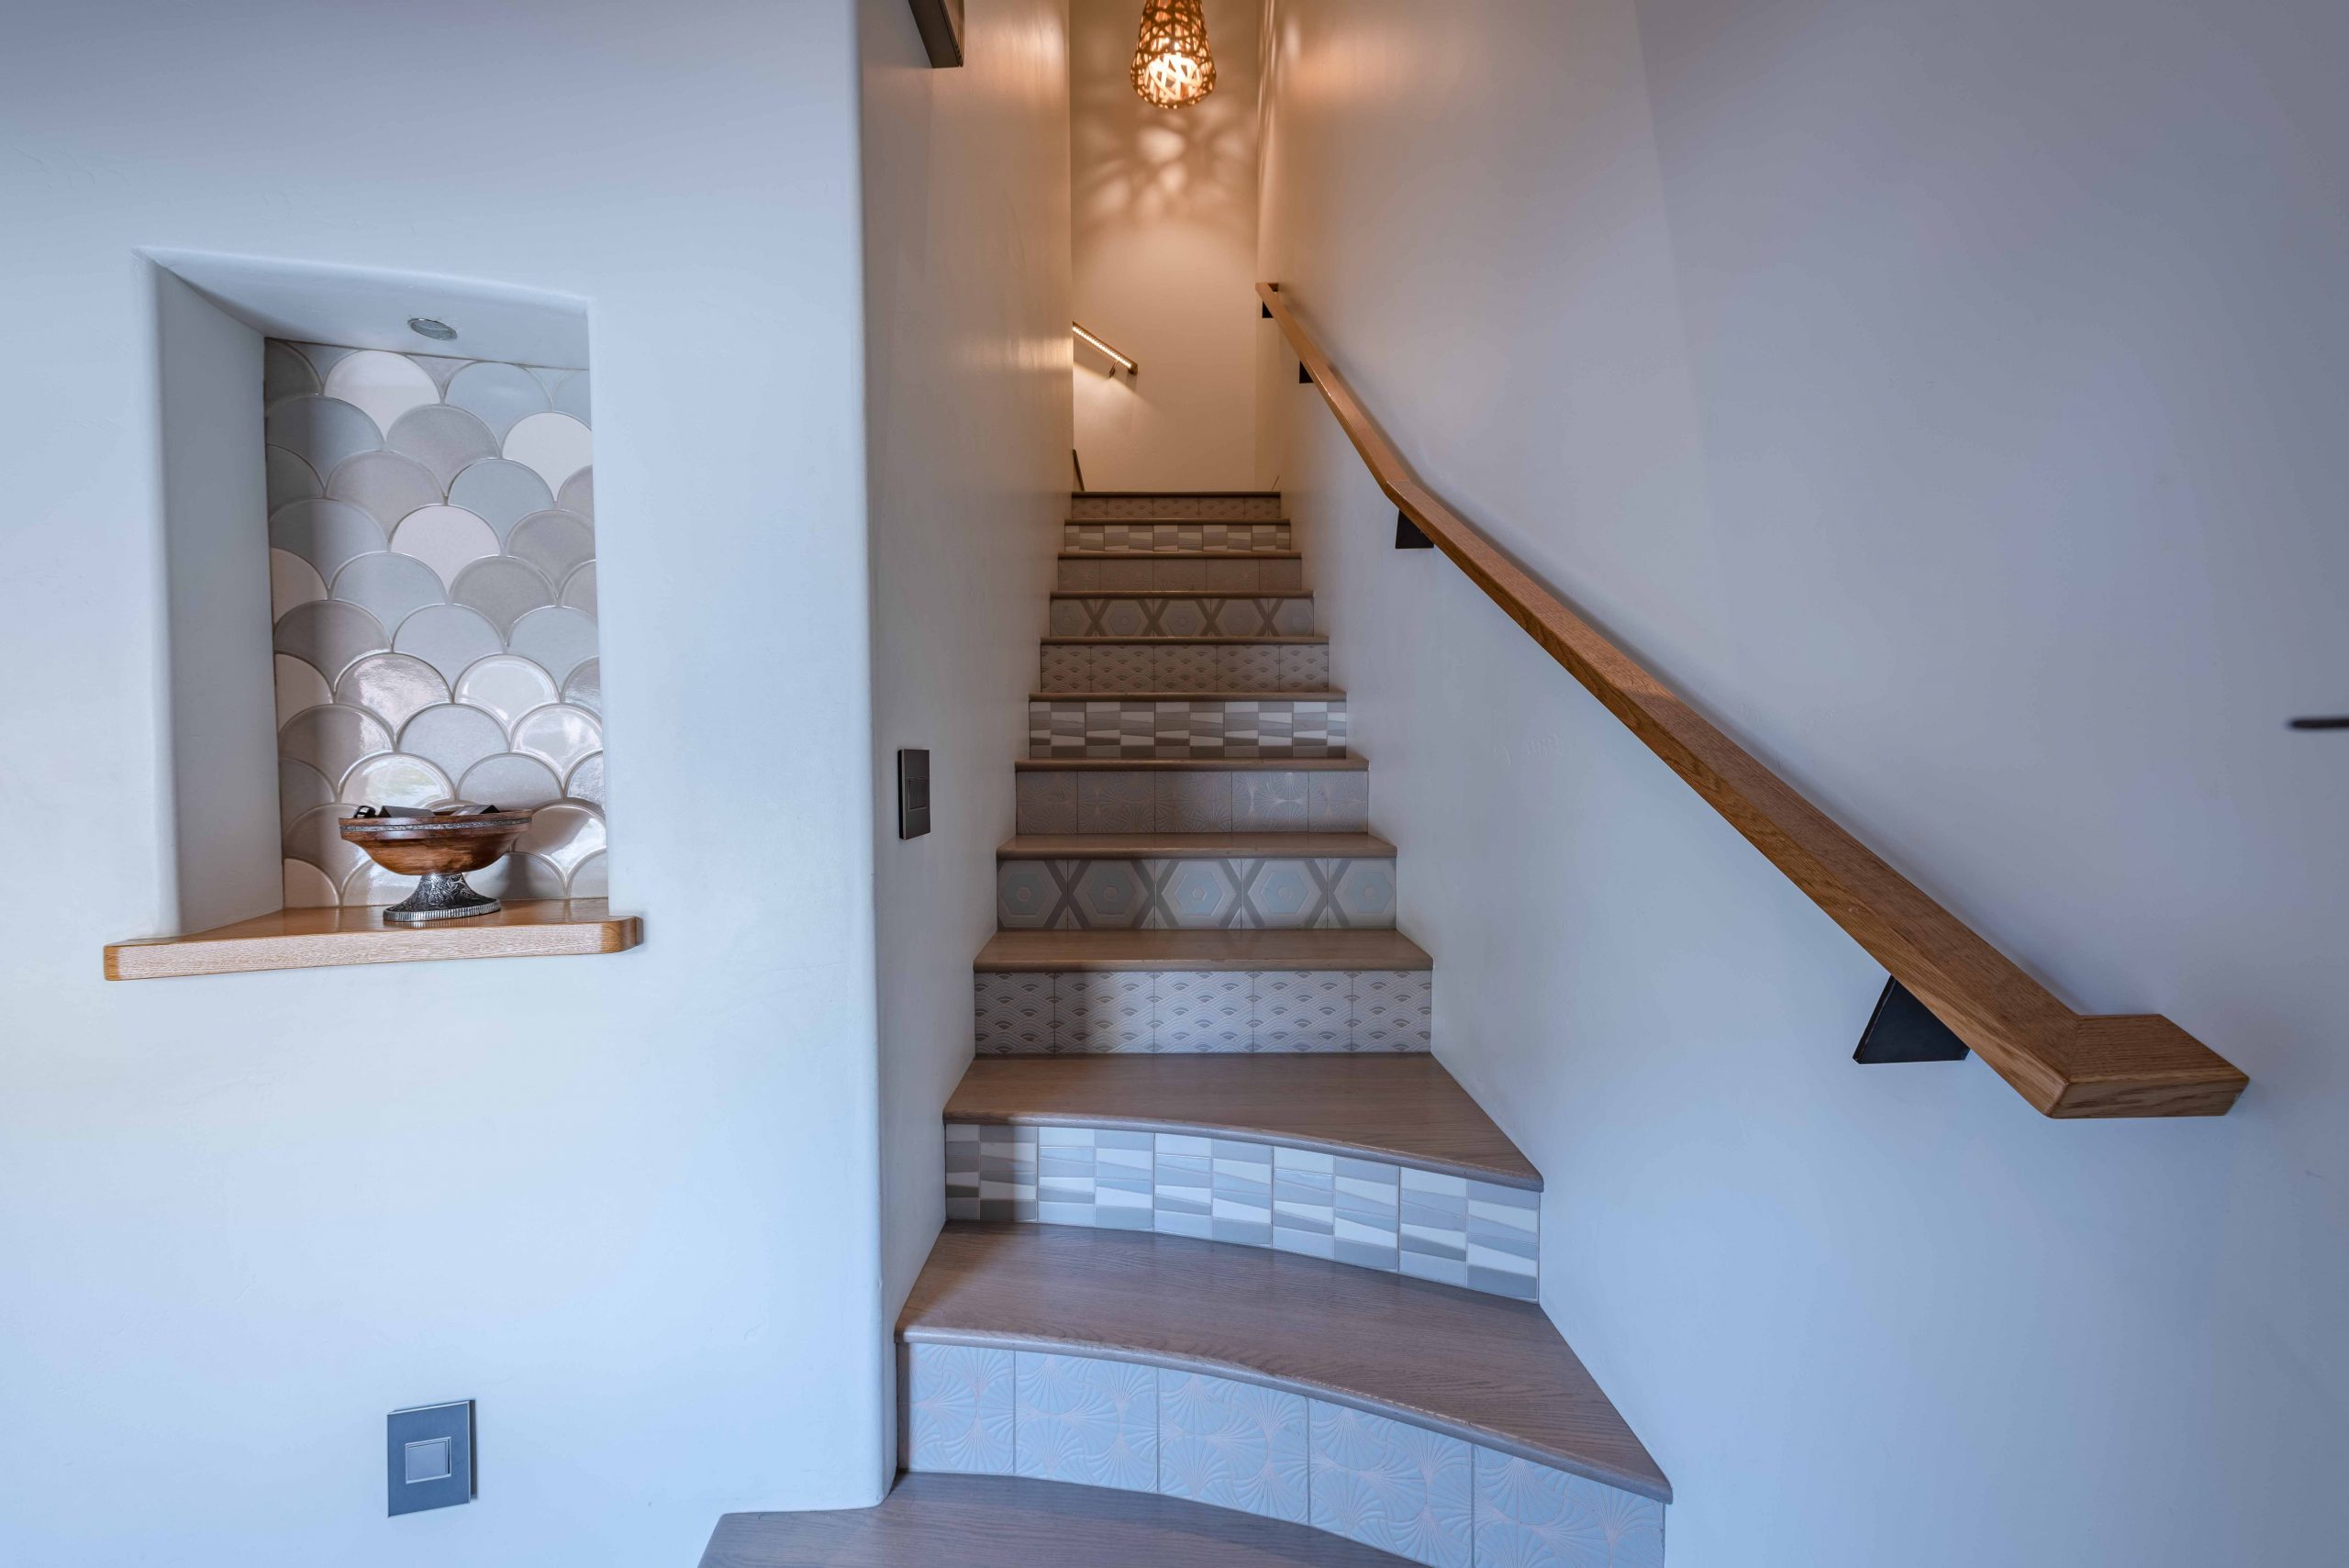 Staircase to second floor bedrooms